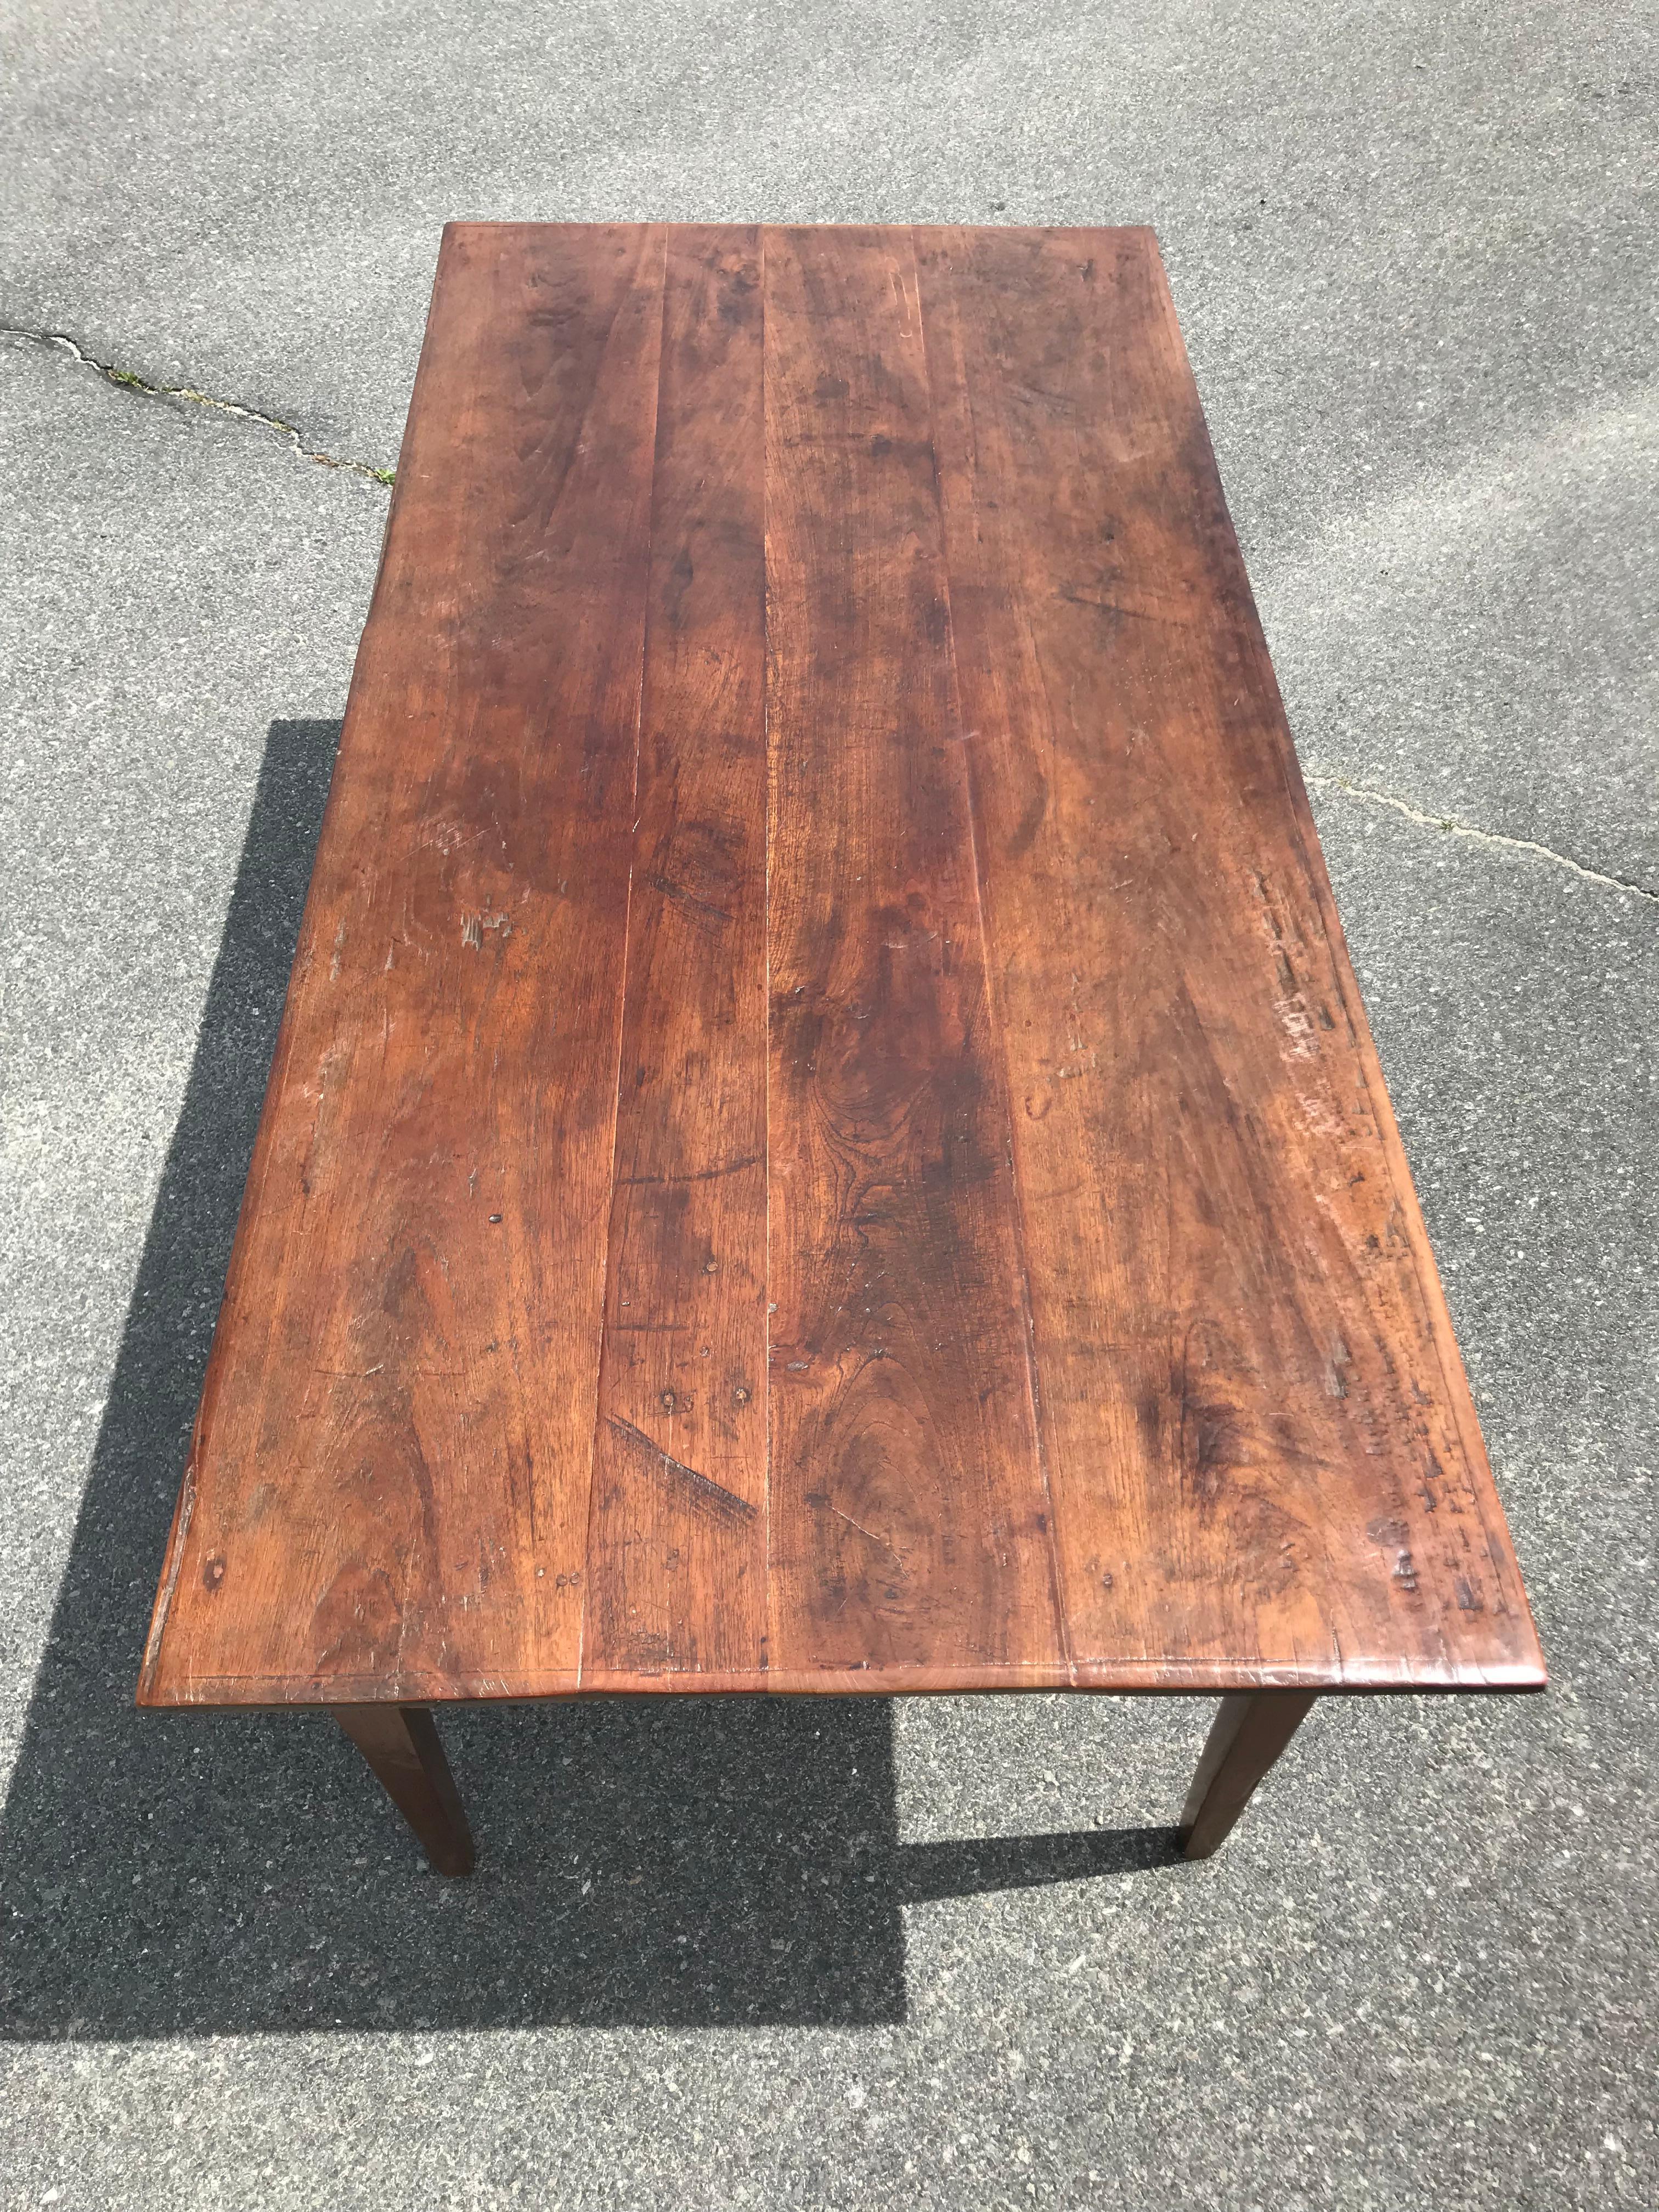 Oak farm table.
Top with old boards and interesting edge detail.